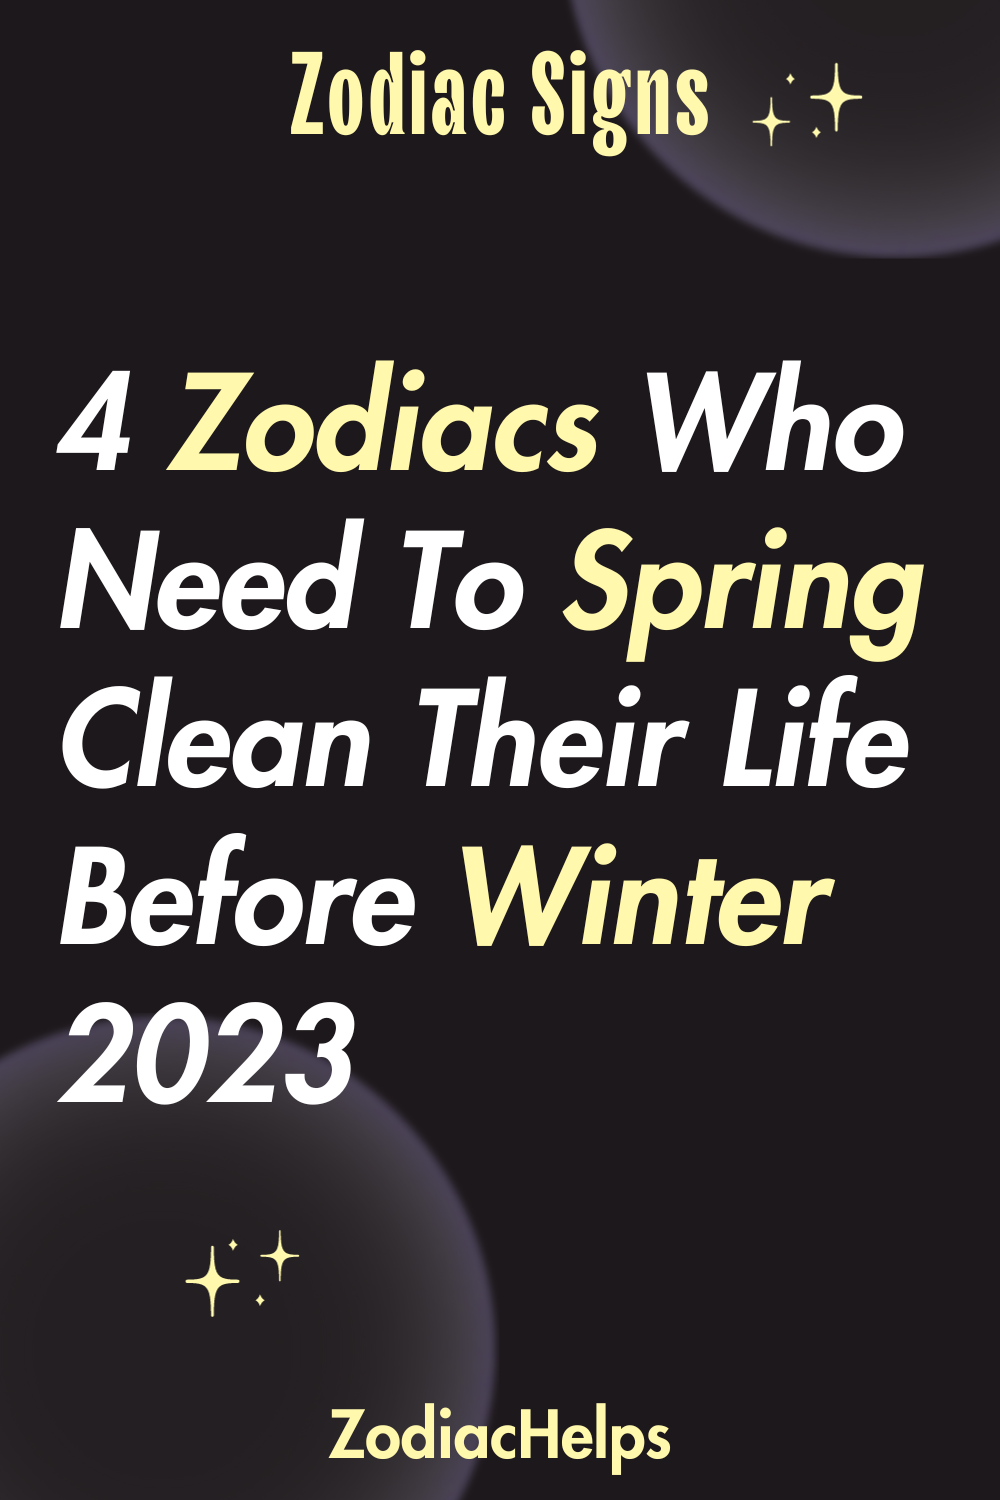 4 Zodiacs Who Need To Spring Clean Their Life Before Winter 2023